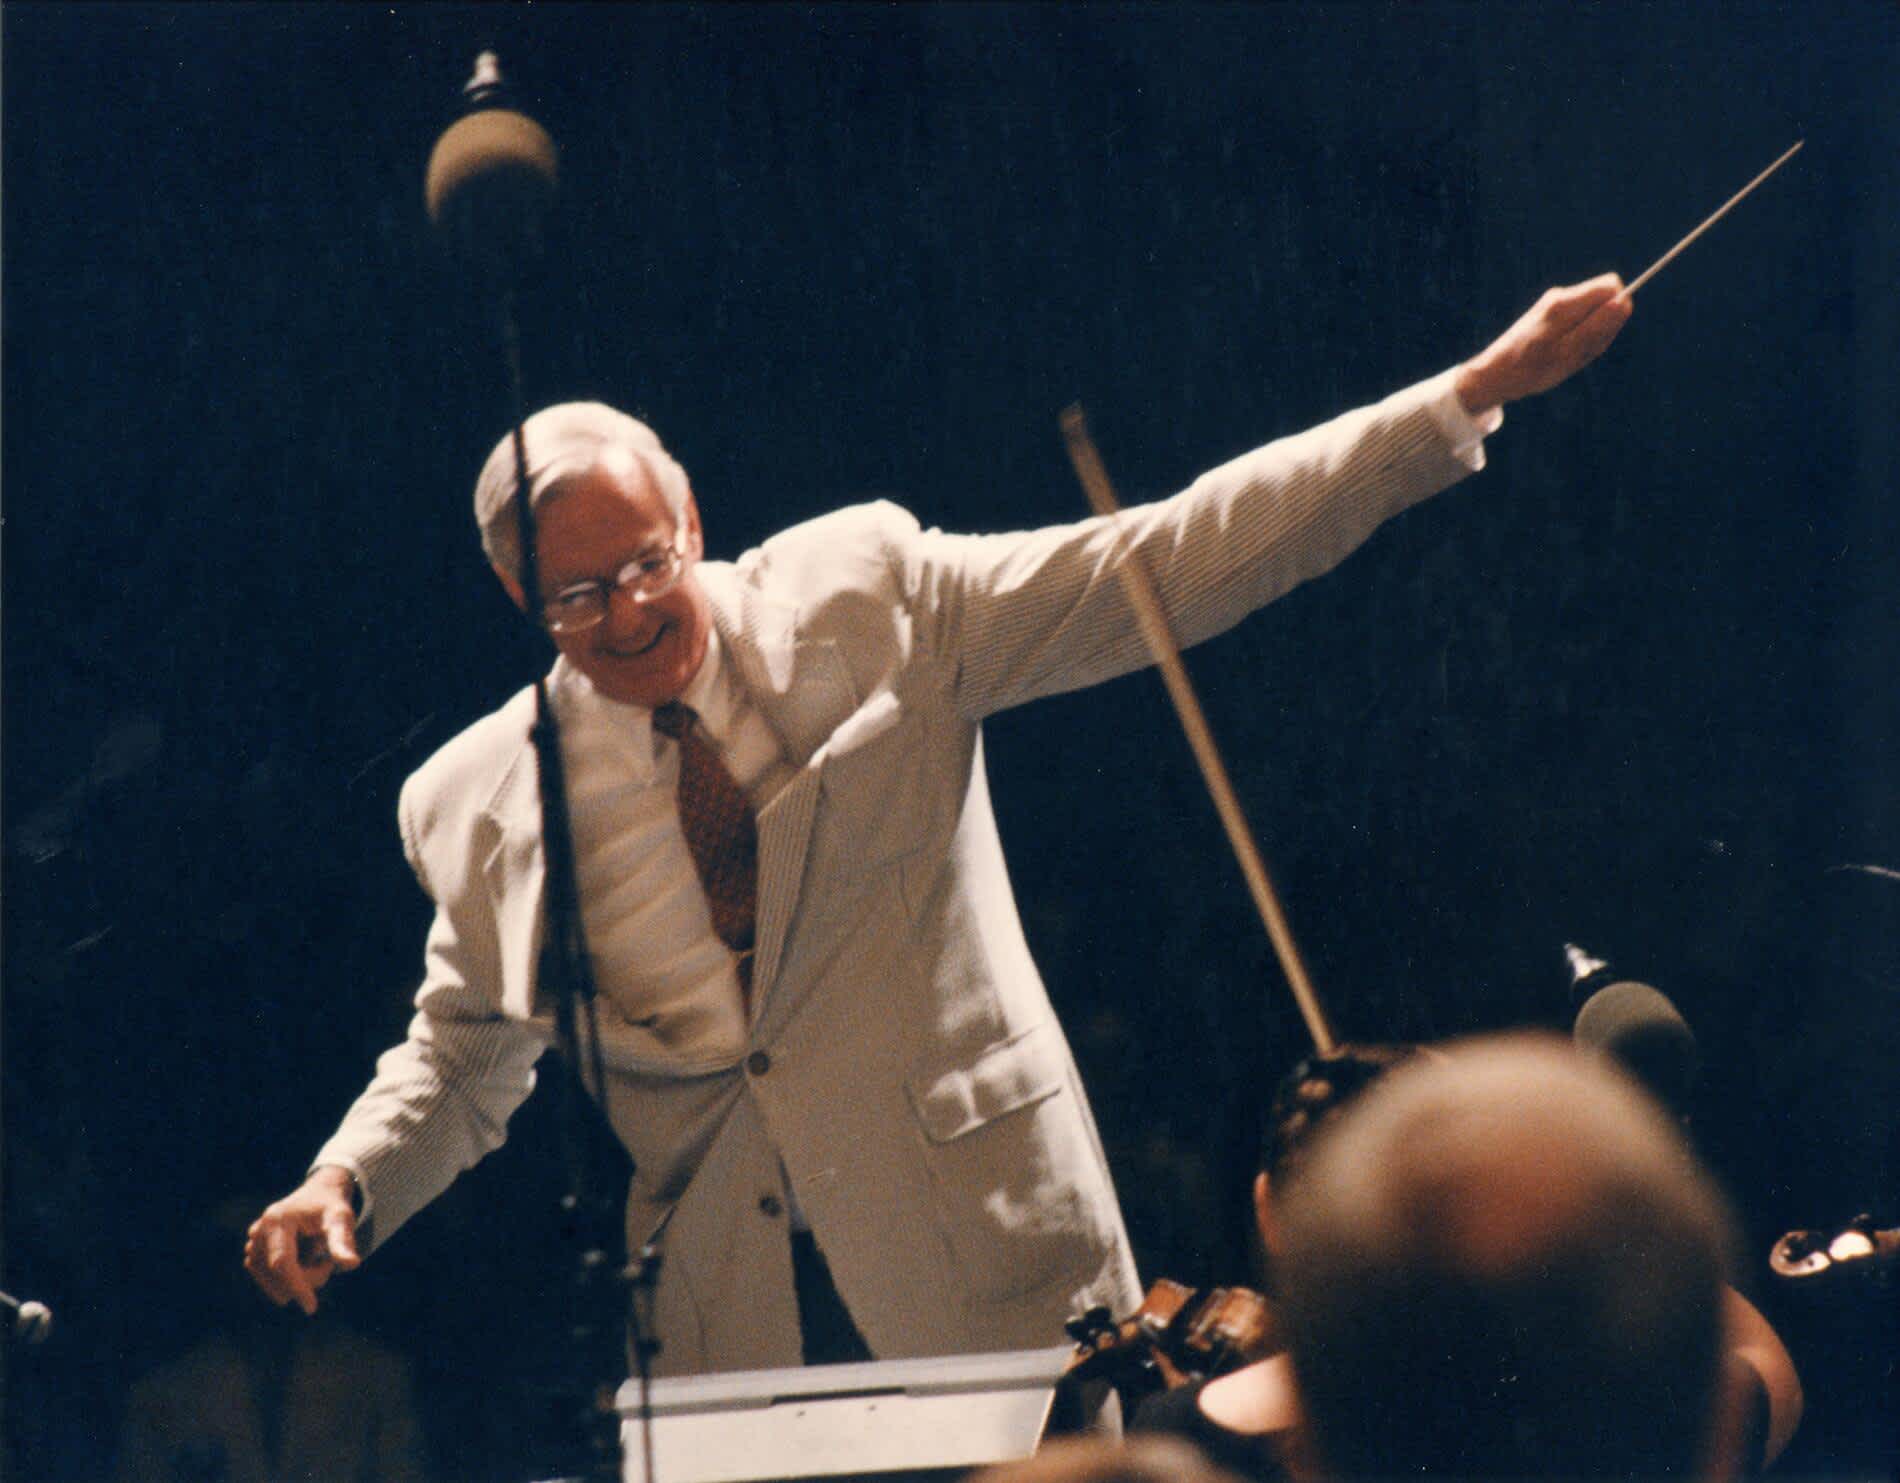 Bowen "Buzz" McCoy conducting The Star-Spangled Banner at the Hollywood Bowl on Opening Night, June 25, 1999.